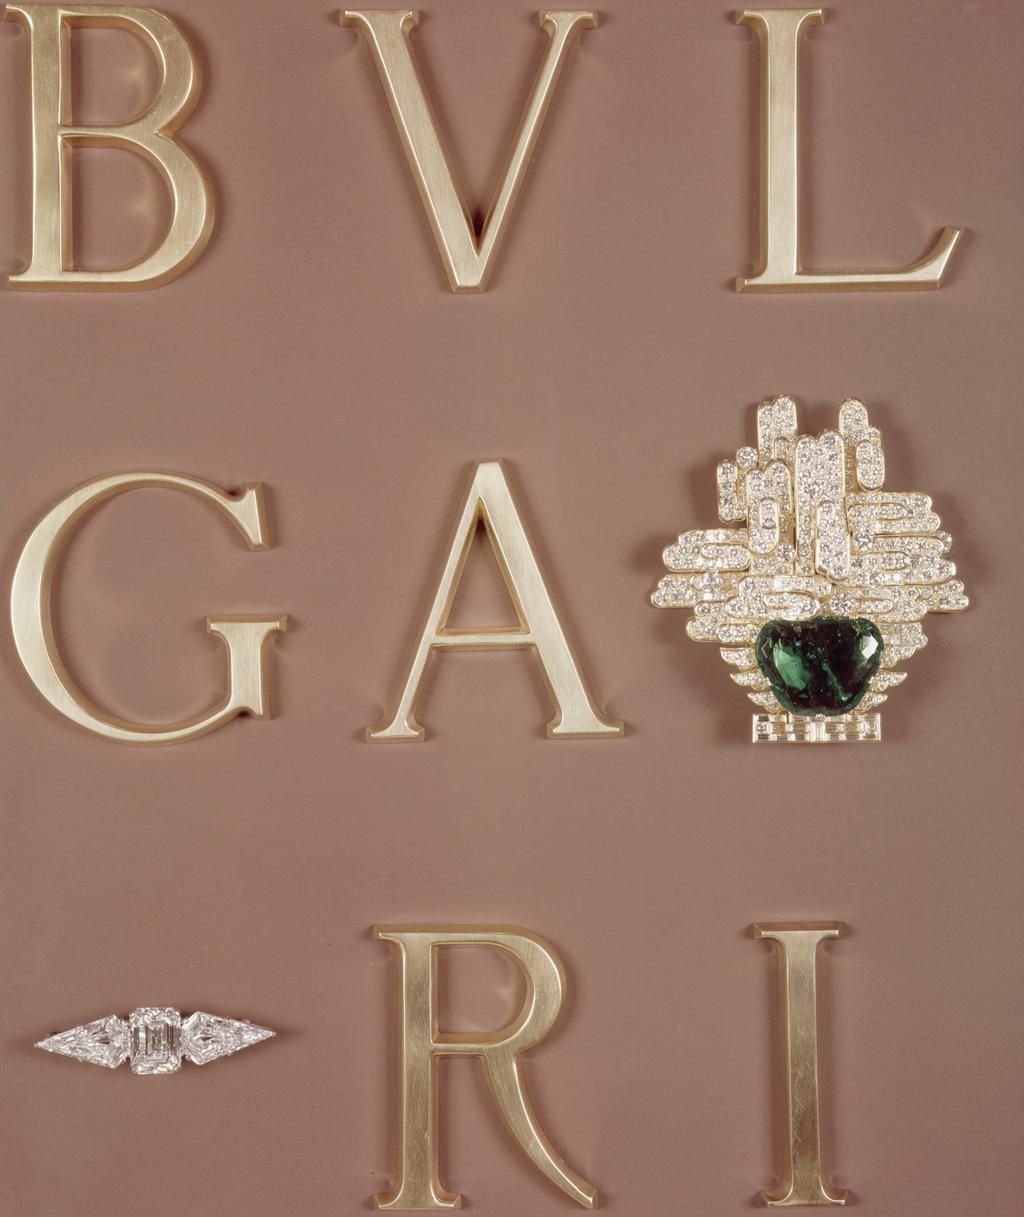 TIMELESS ELEGANCE Since 1884, the Bvlgari name has stood for excellence and an exclusive sense of Italian style; elements reflected this festive season at The Bvlgari Resort Dubai with an informal